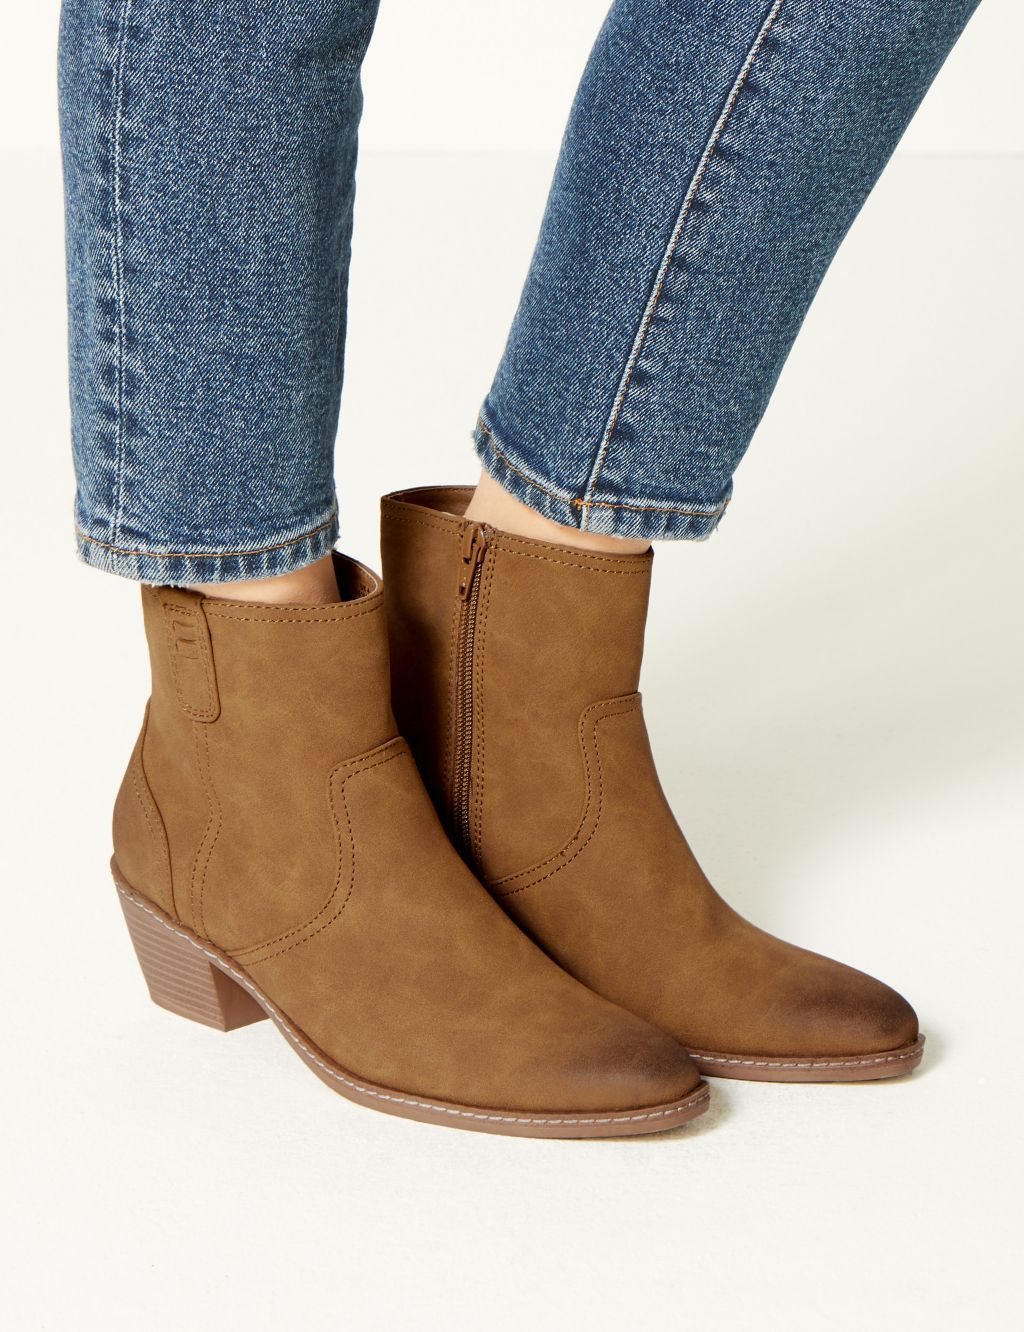 Almond Toe Ankle Boots 3 of 5